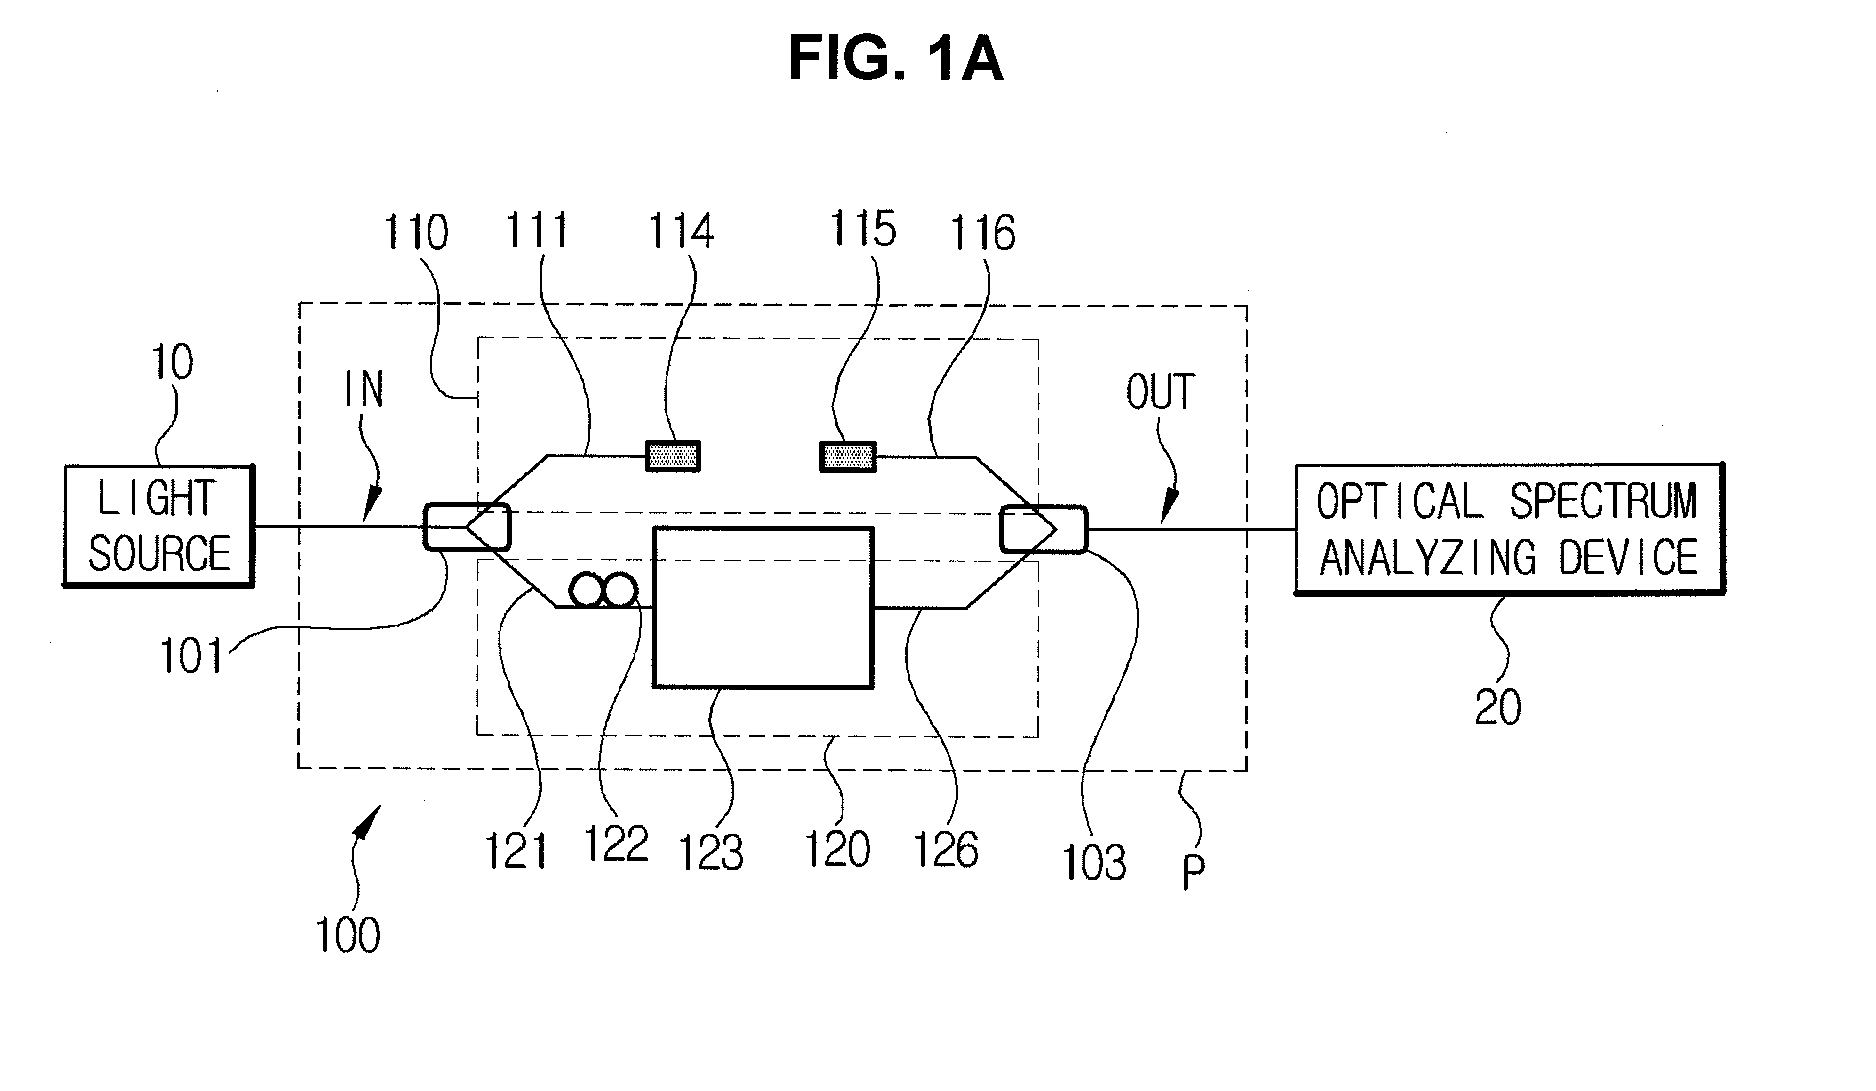 Systems for measuring electro-optic and thermo-optic coefficients by using interference fringe measurement, and methods of measuring electro-optic and thermo-optic coefficients by using the systems